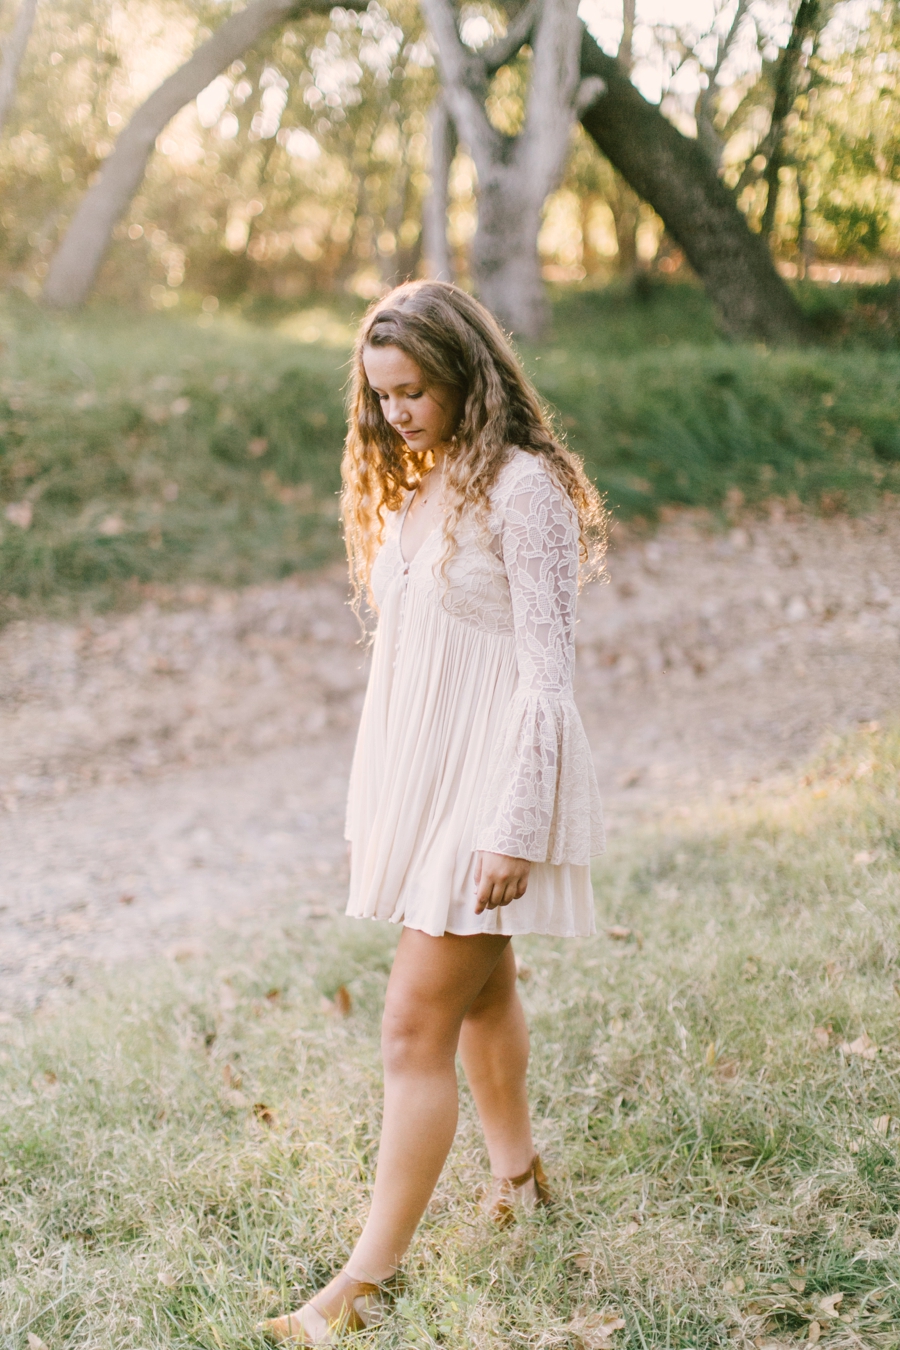 Daisy's Senior Session - Michelle Lillywhite Photography